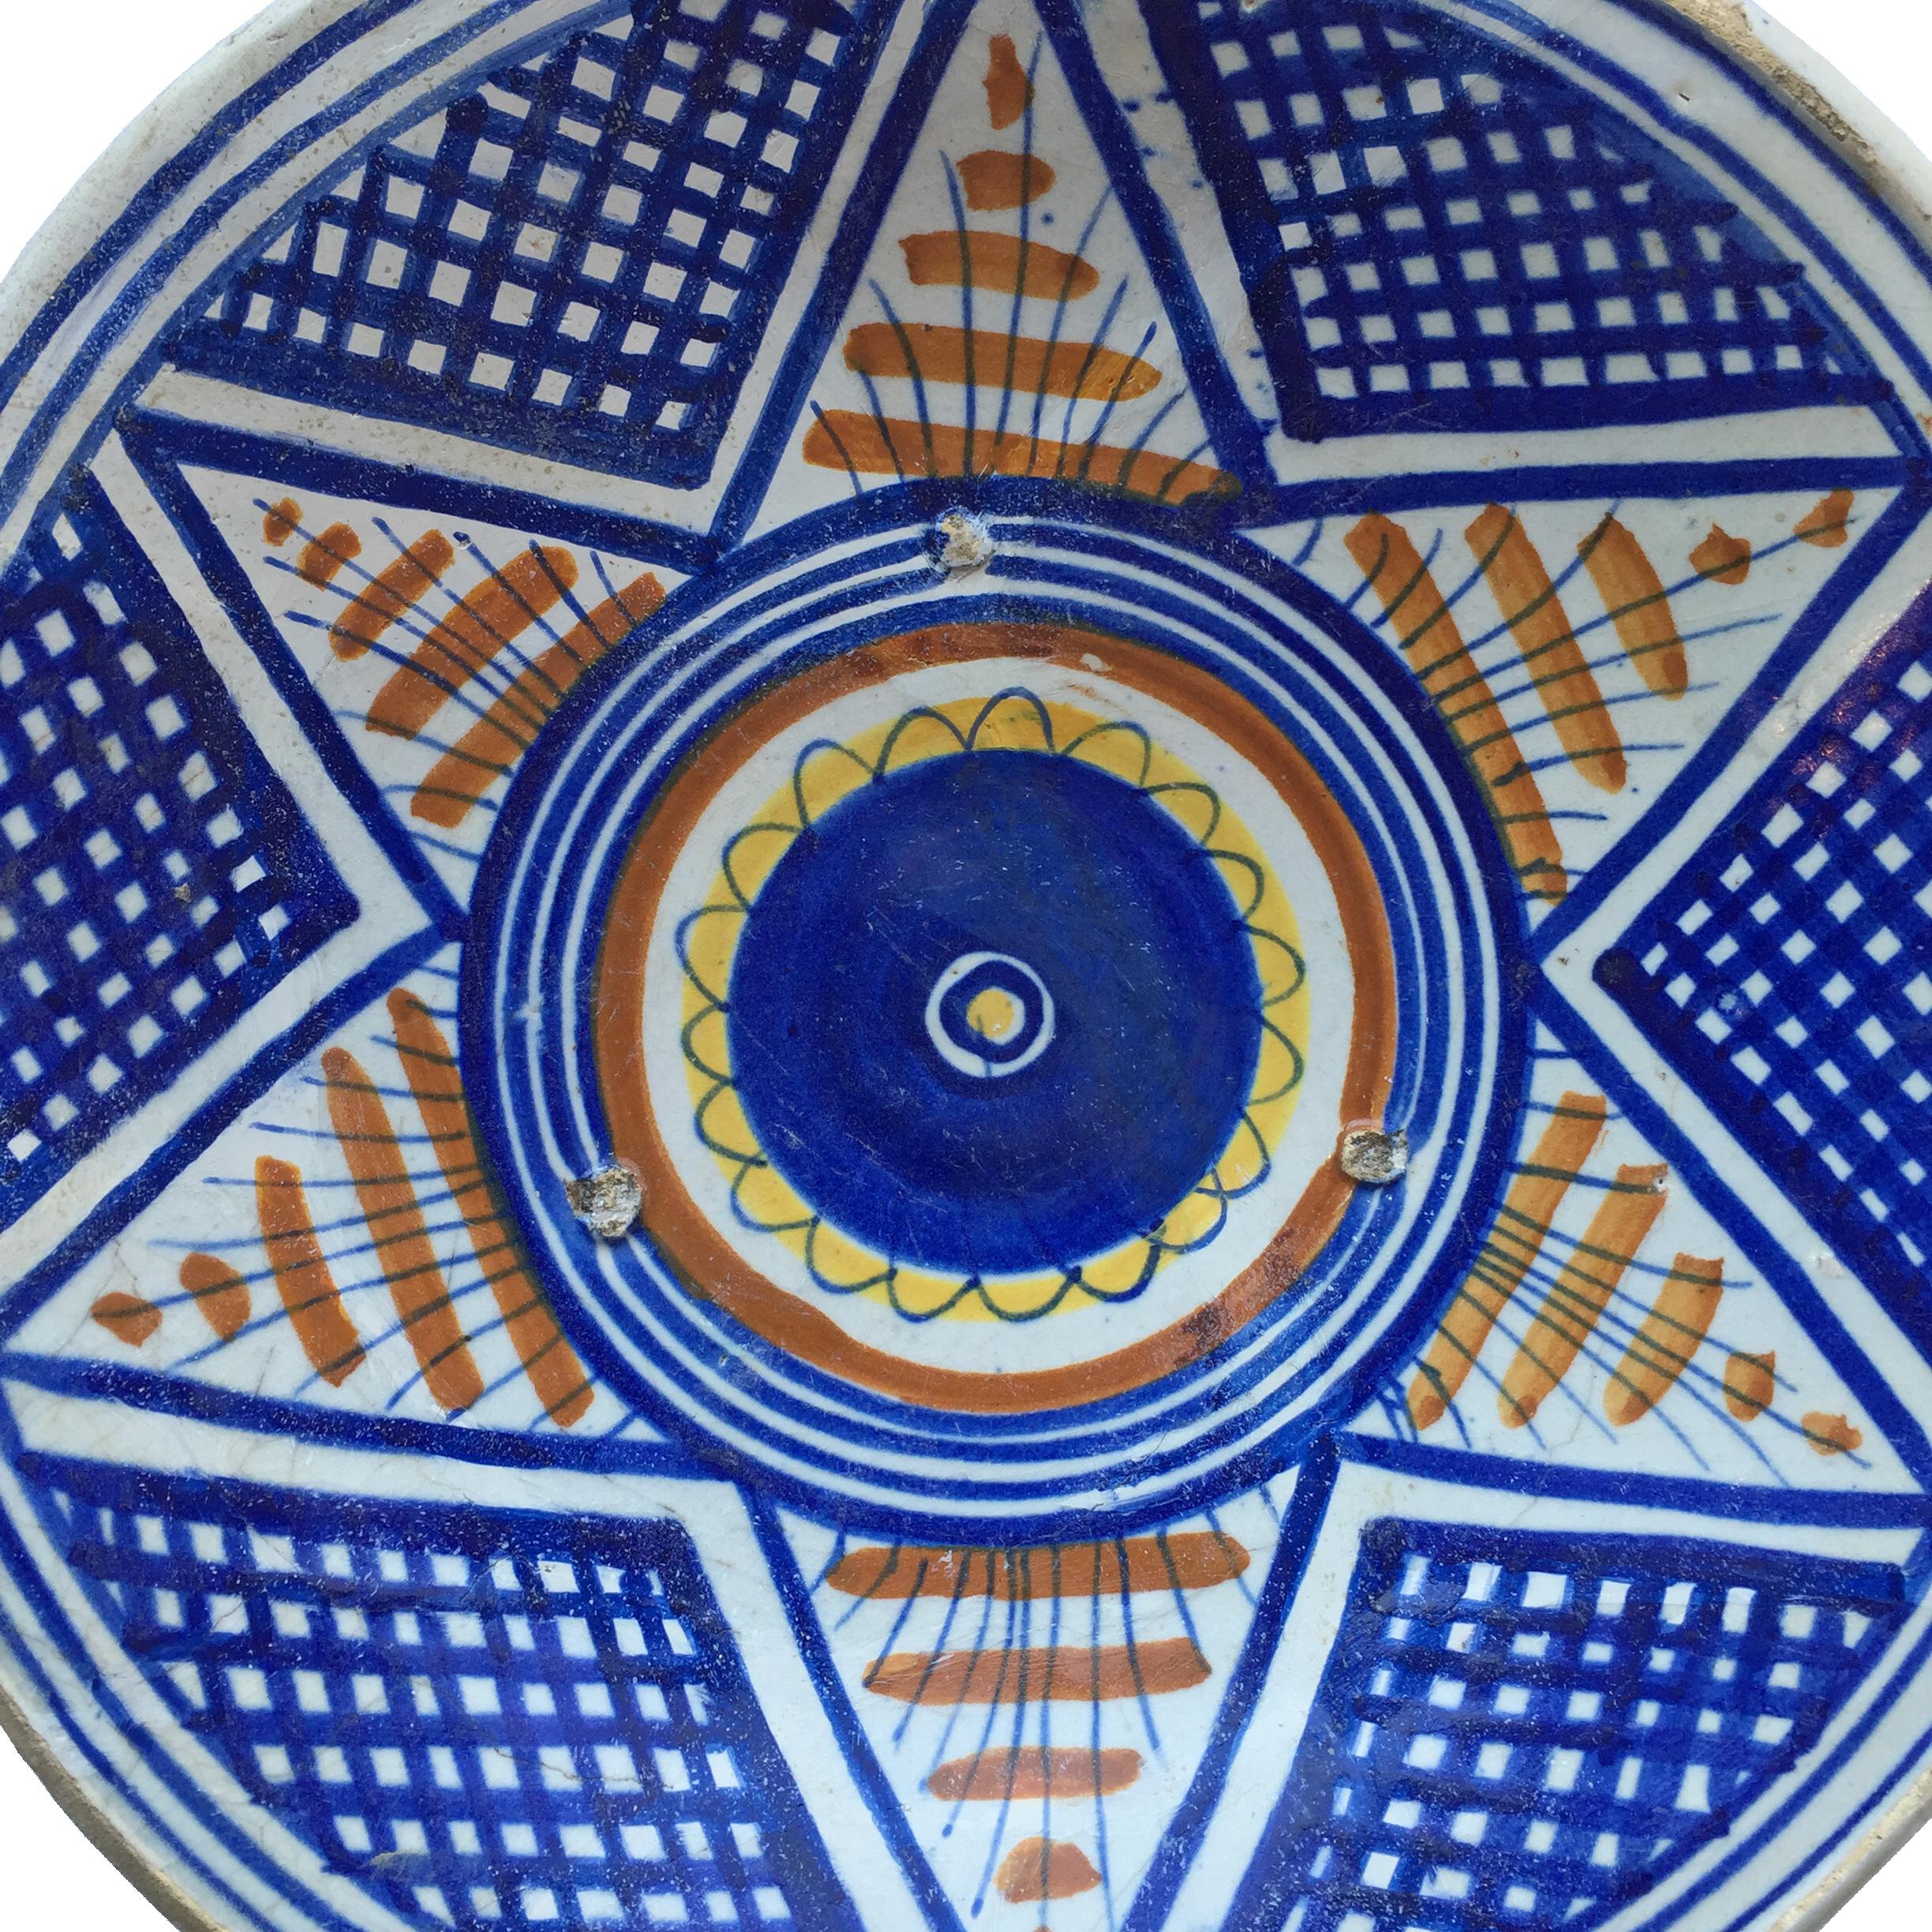 A rare Dutch Majolica plate with a star design.
Northern Netherlands, probably made in the city of Haarlem.
Made 1560 - 1580

Dutch majolica is one of the more rare ceramics known, especially in a condition where it is almost complete. Dutch